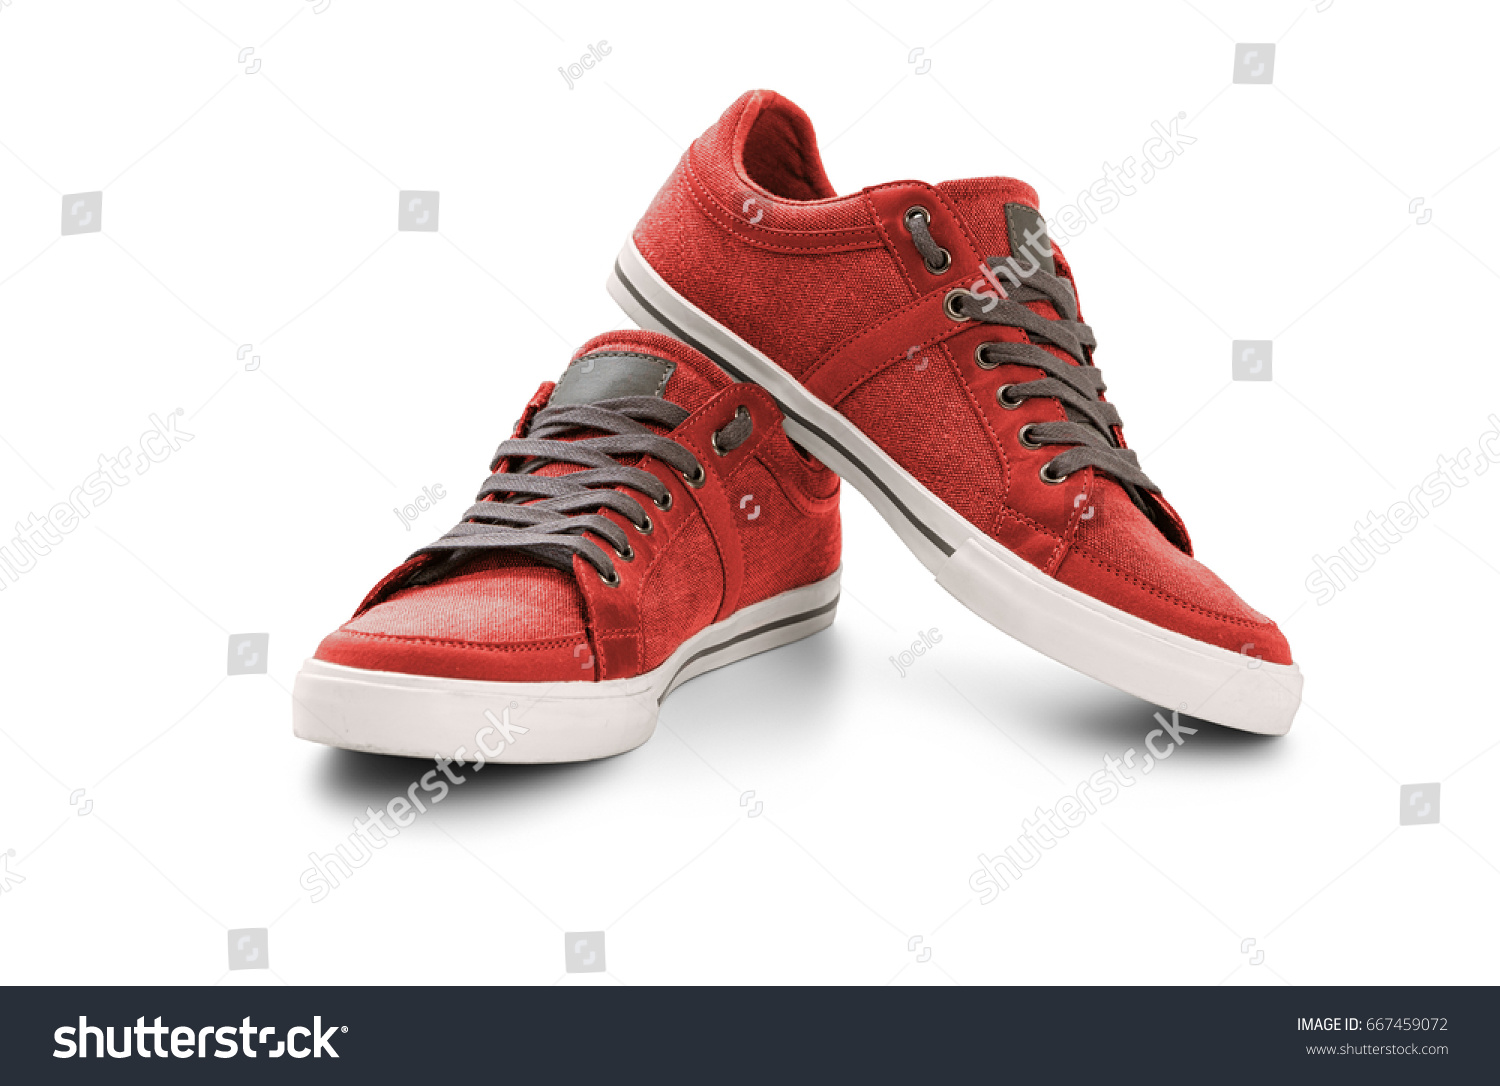 Casual shoes on white background, included clipping path #667459072